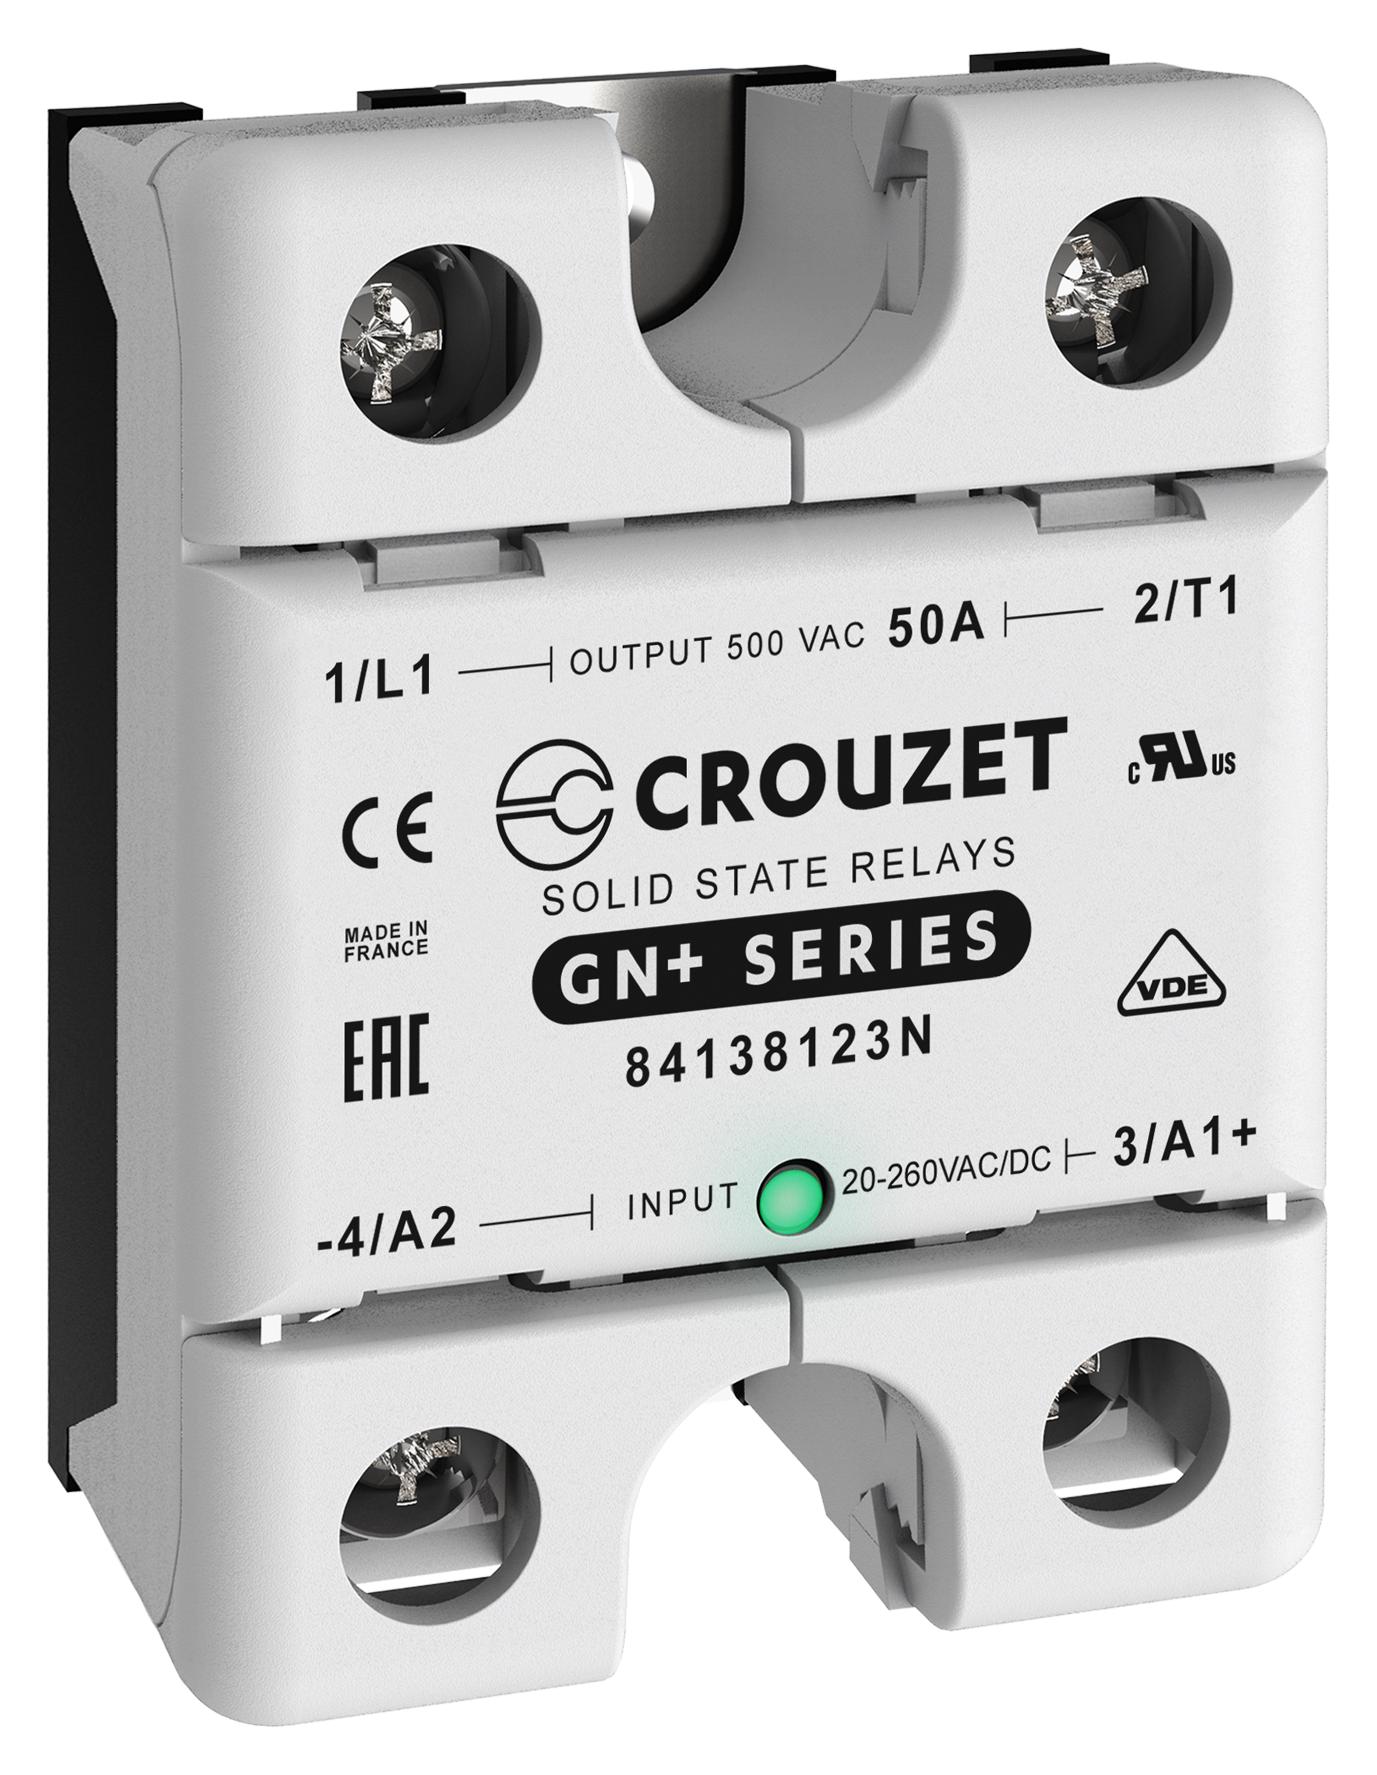 84138123N SOLID STATE RELAY, 50A, 24-500VAC, PANEL CROUZET